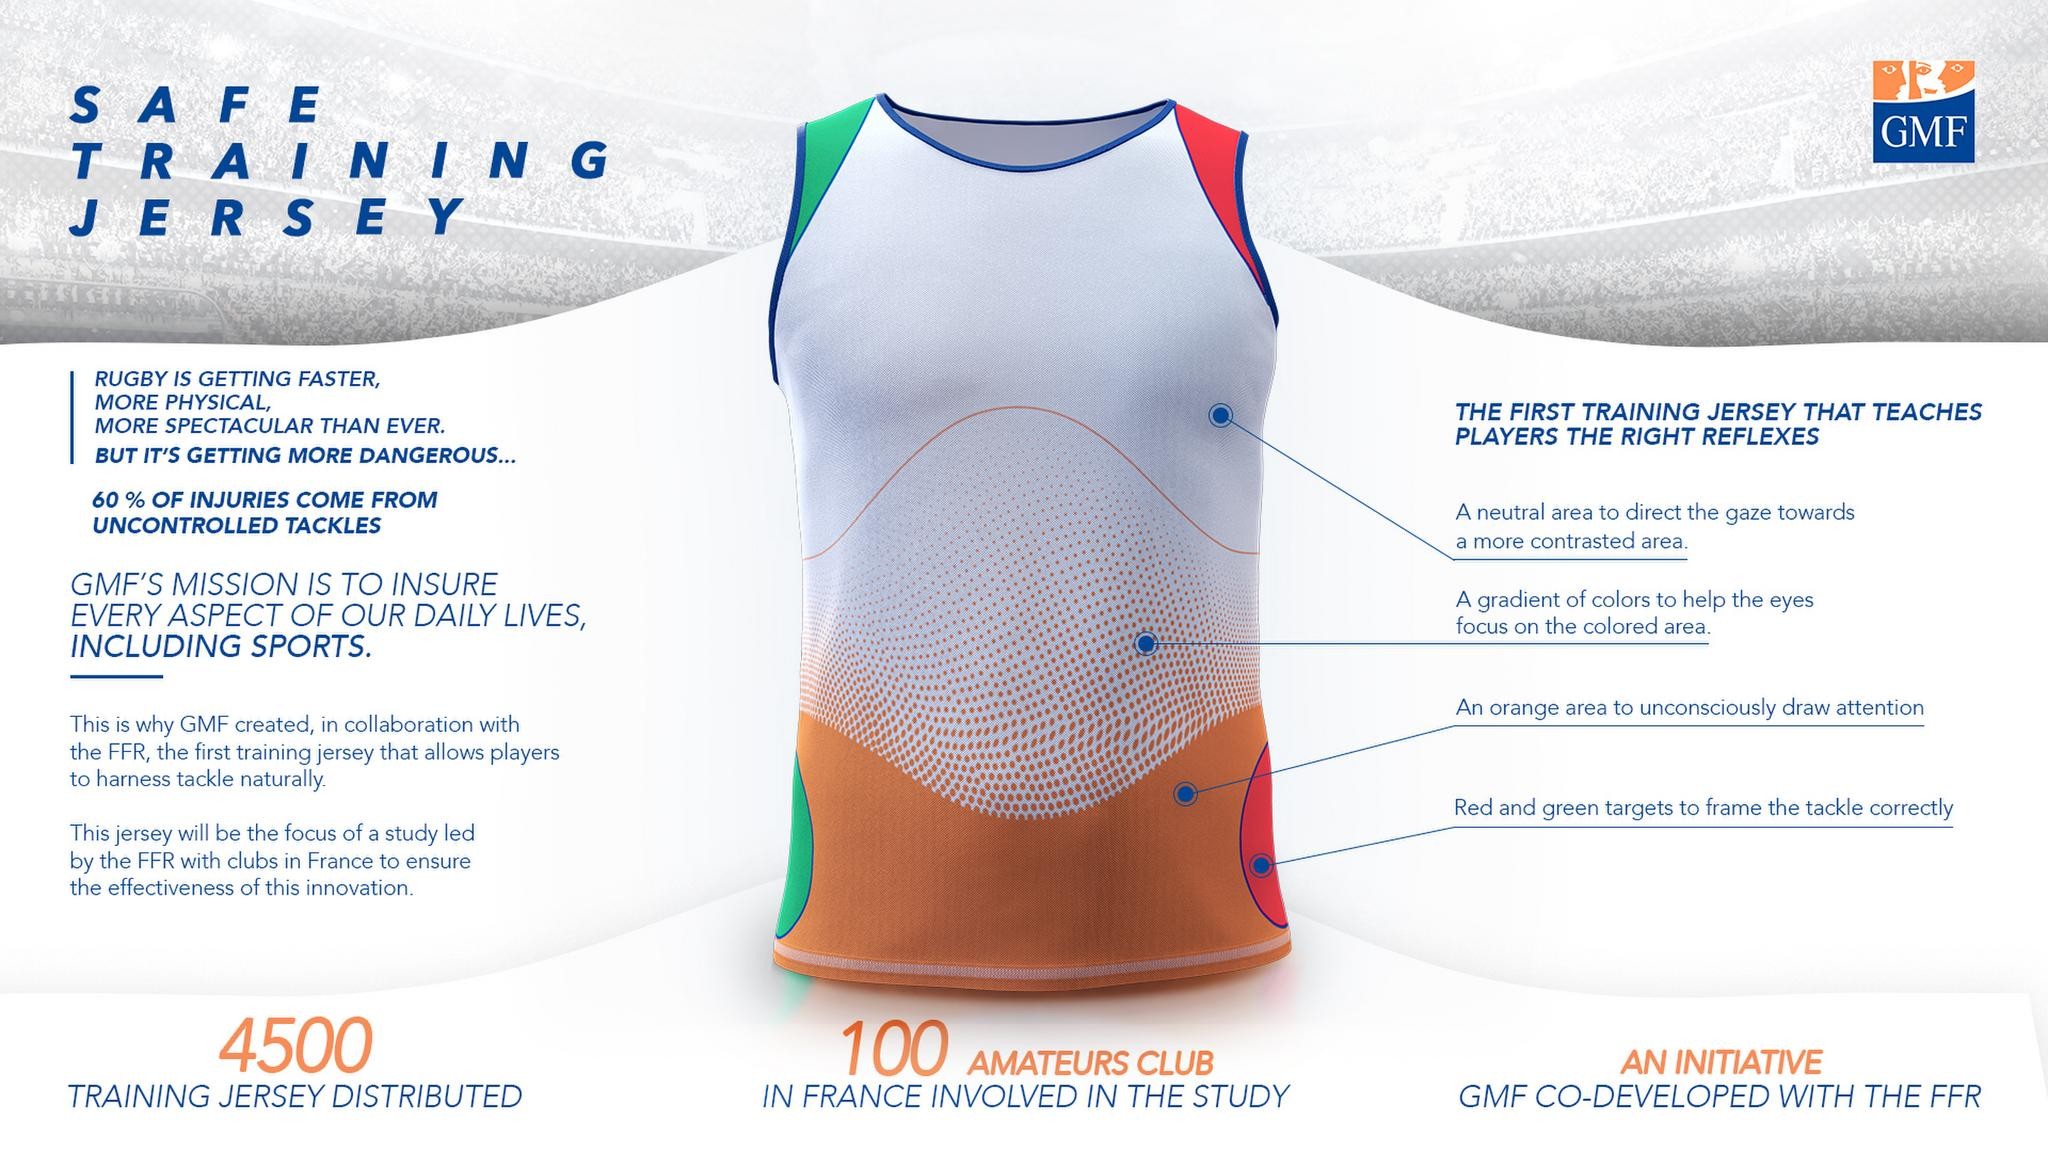 The Safe Training Jersey